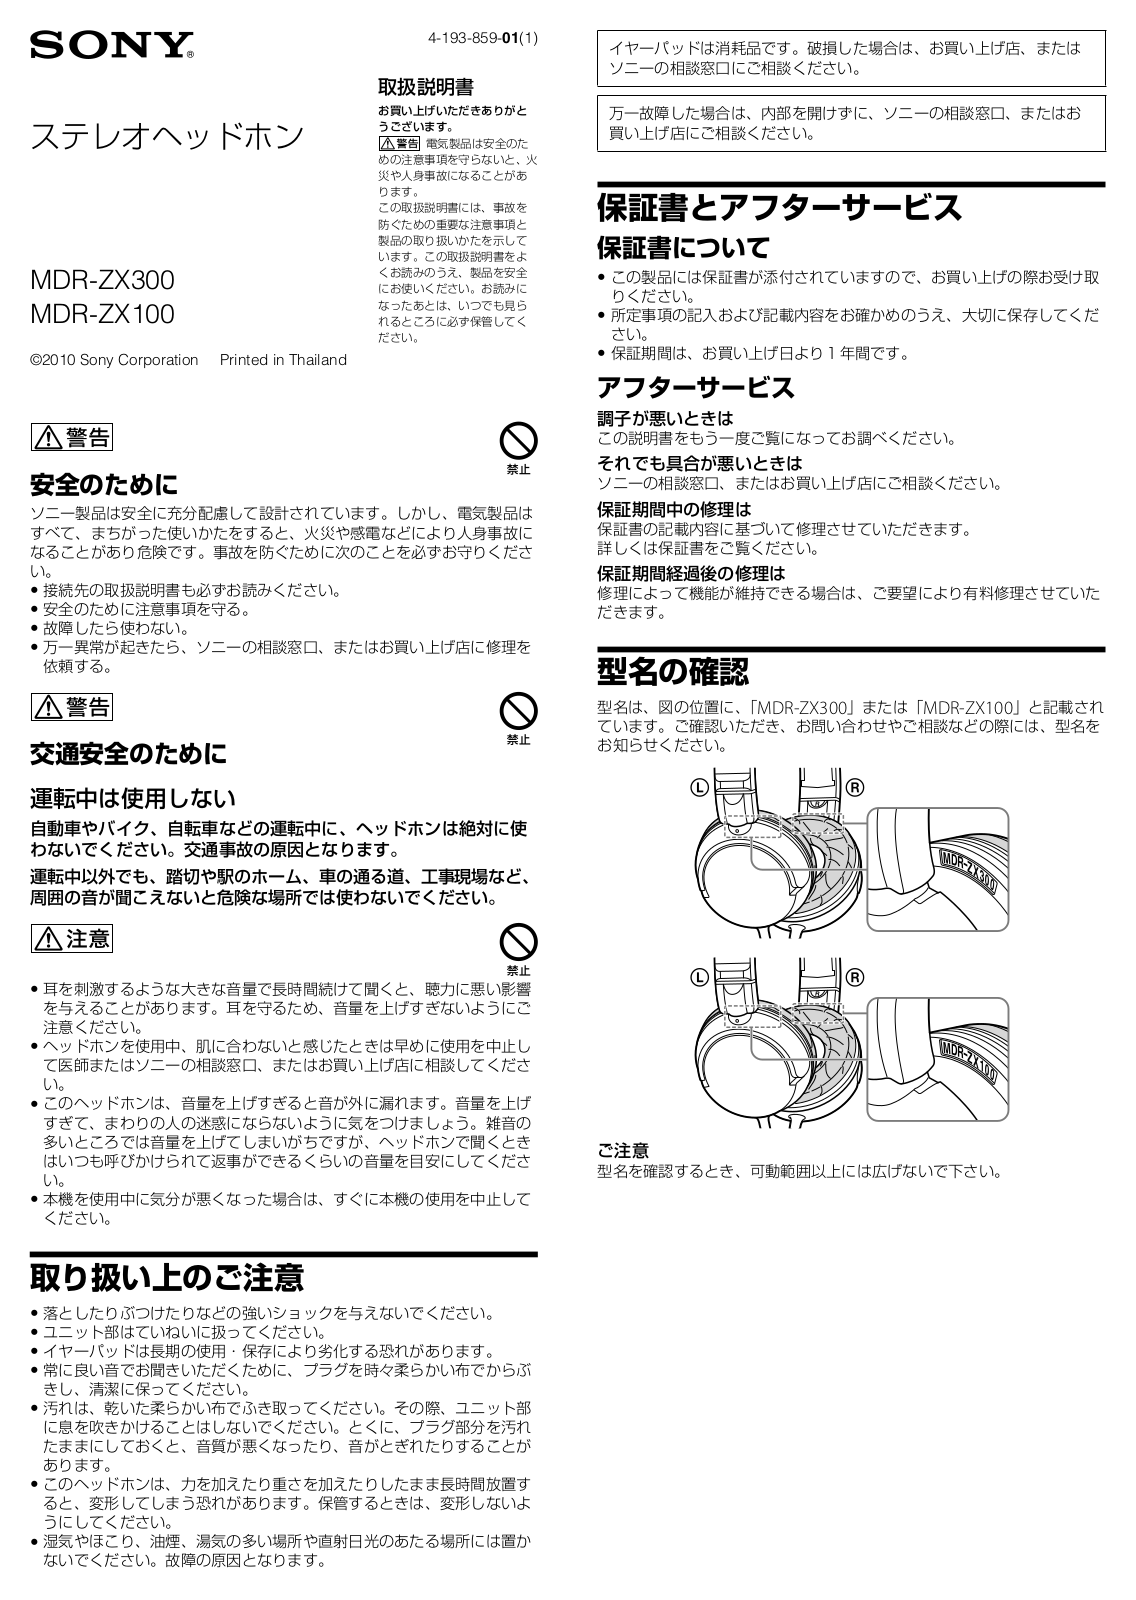 Sony MDR-ZX100, MDR-ZX300 User Manual